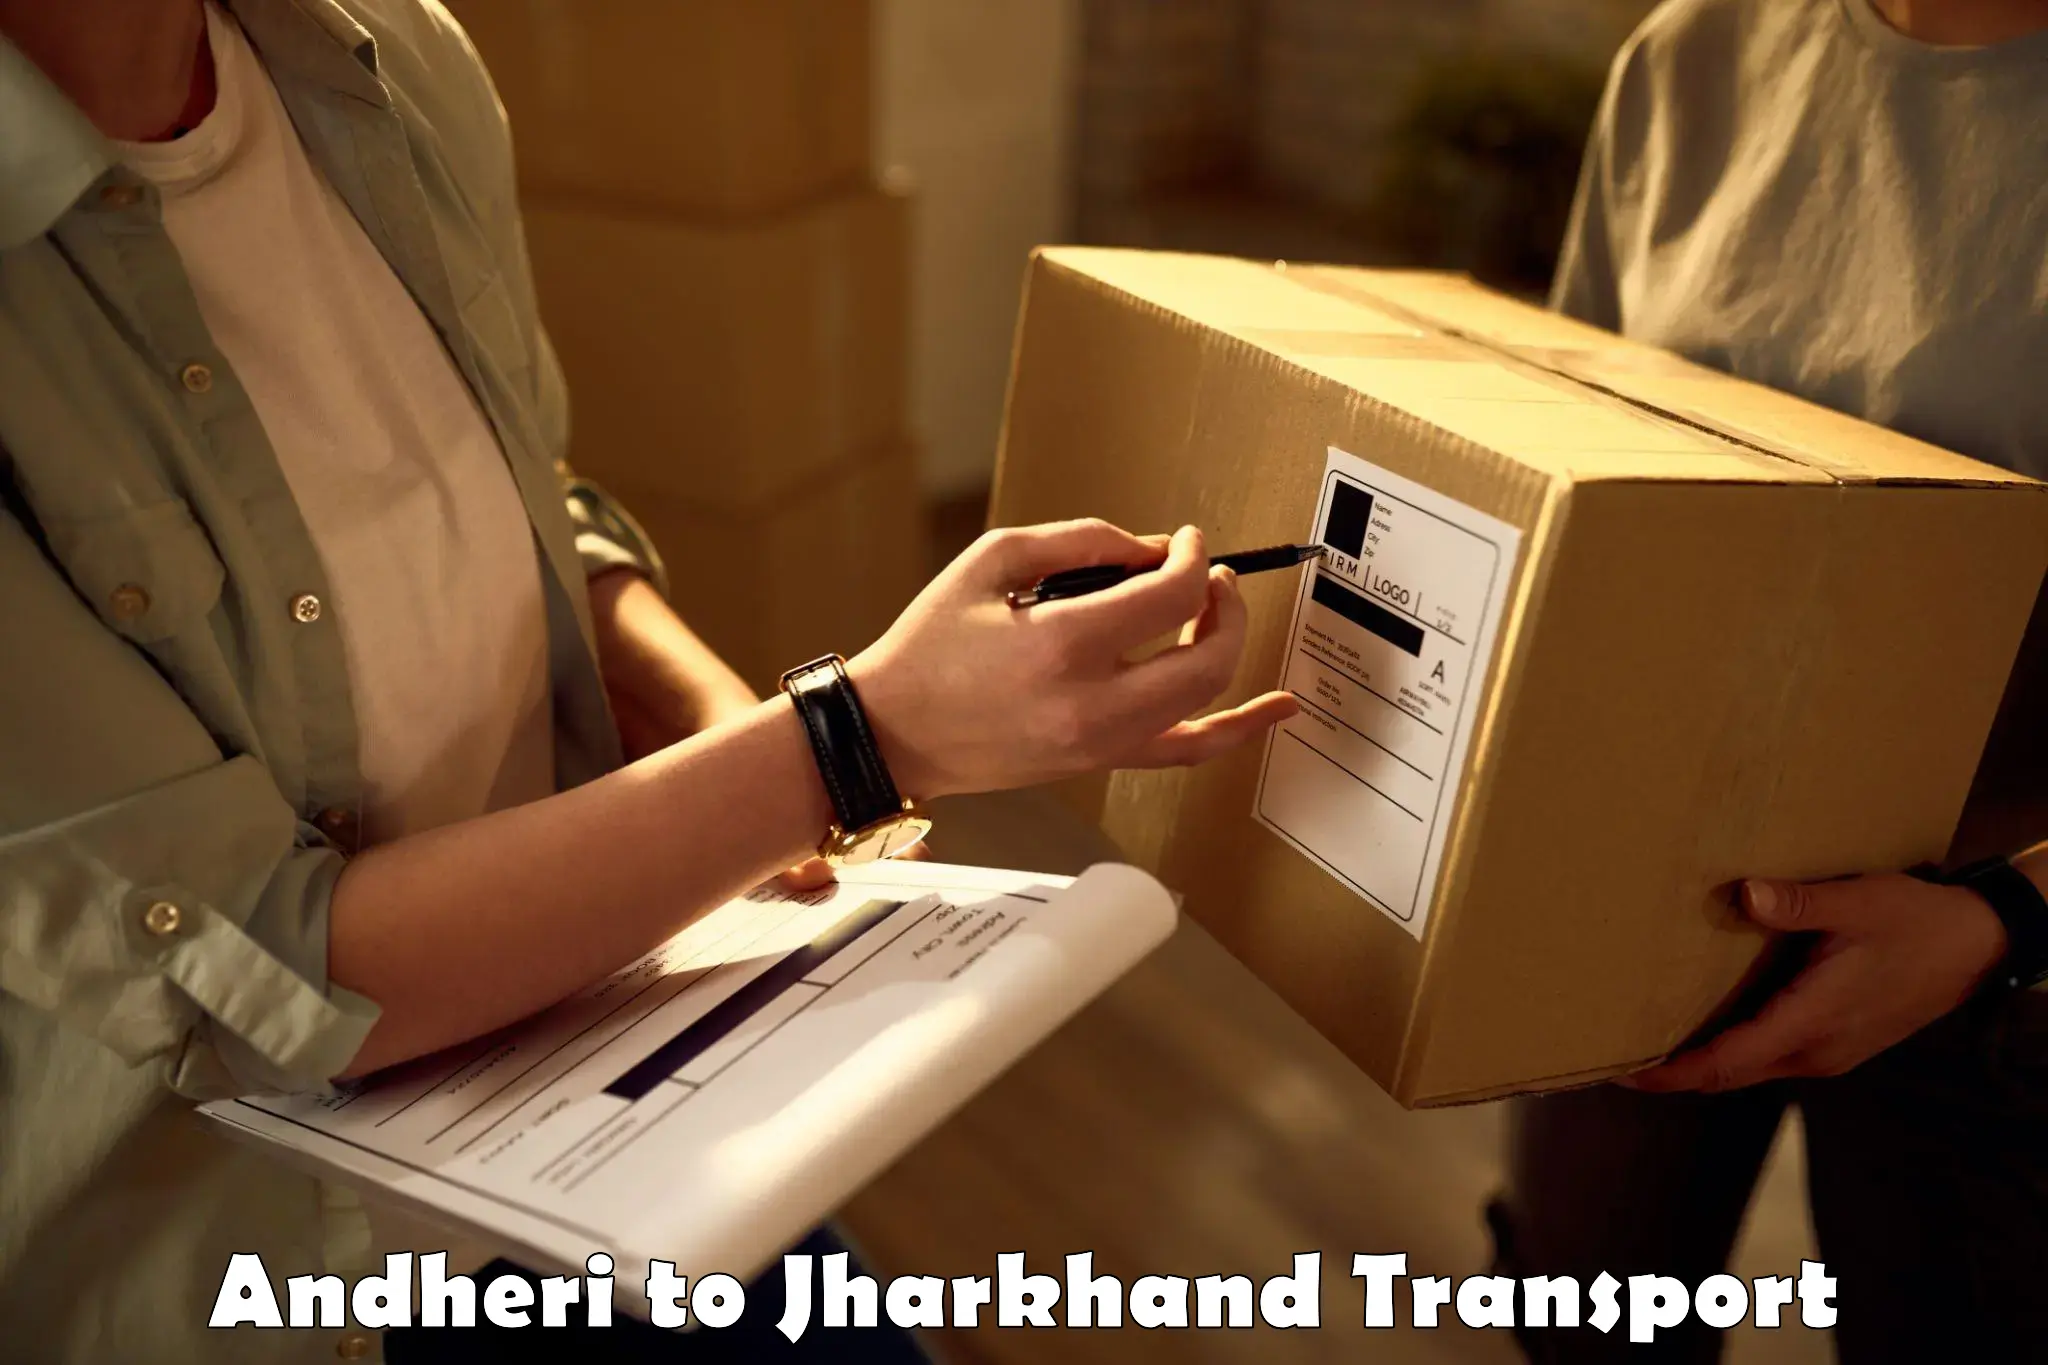 Container transport service Andheri to Jamshedpur